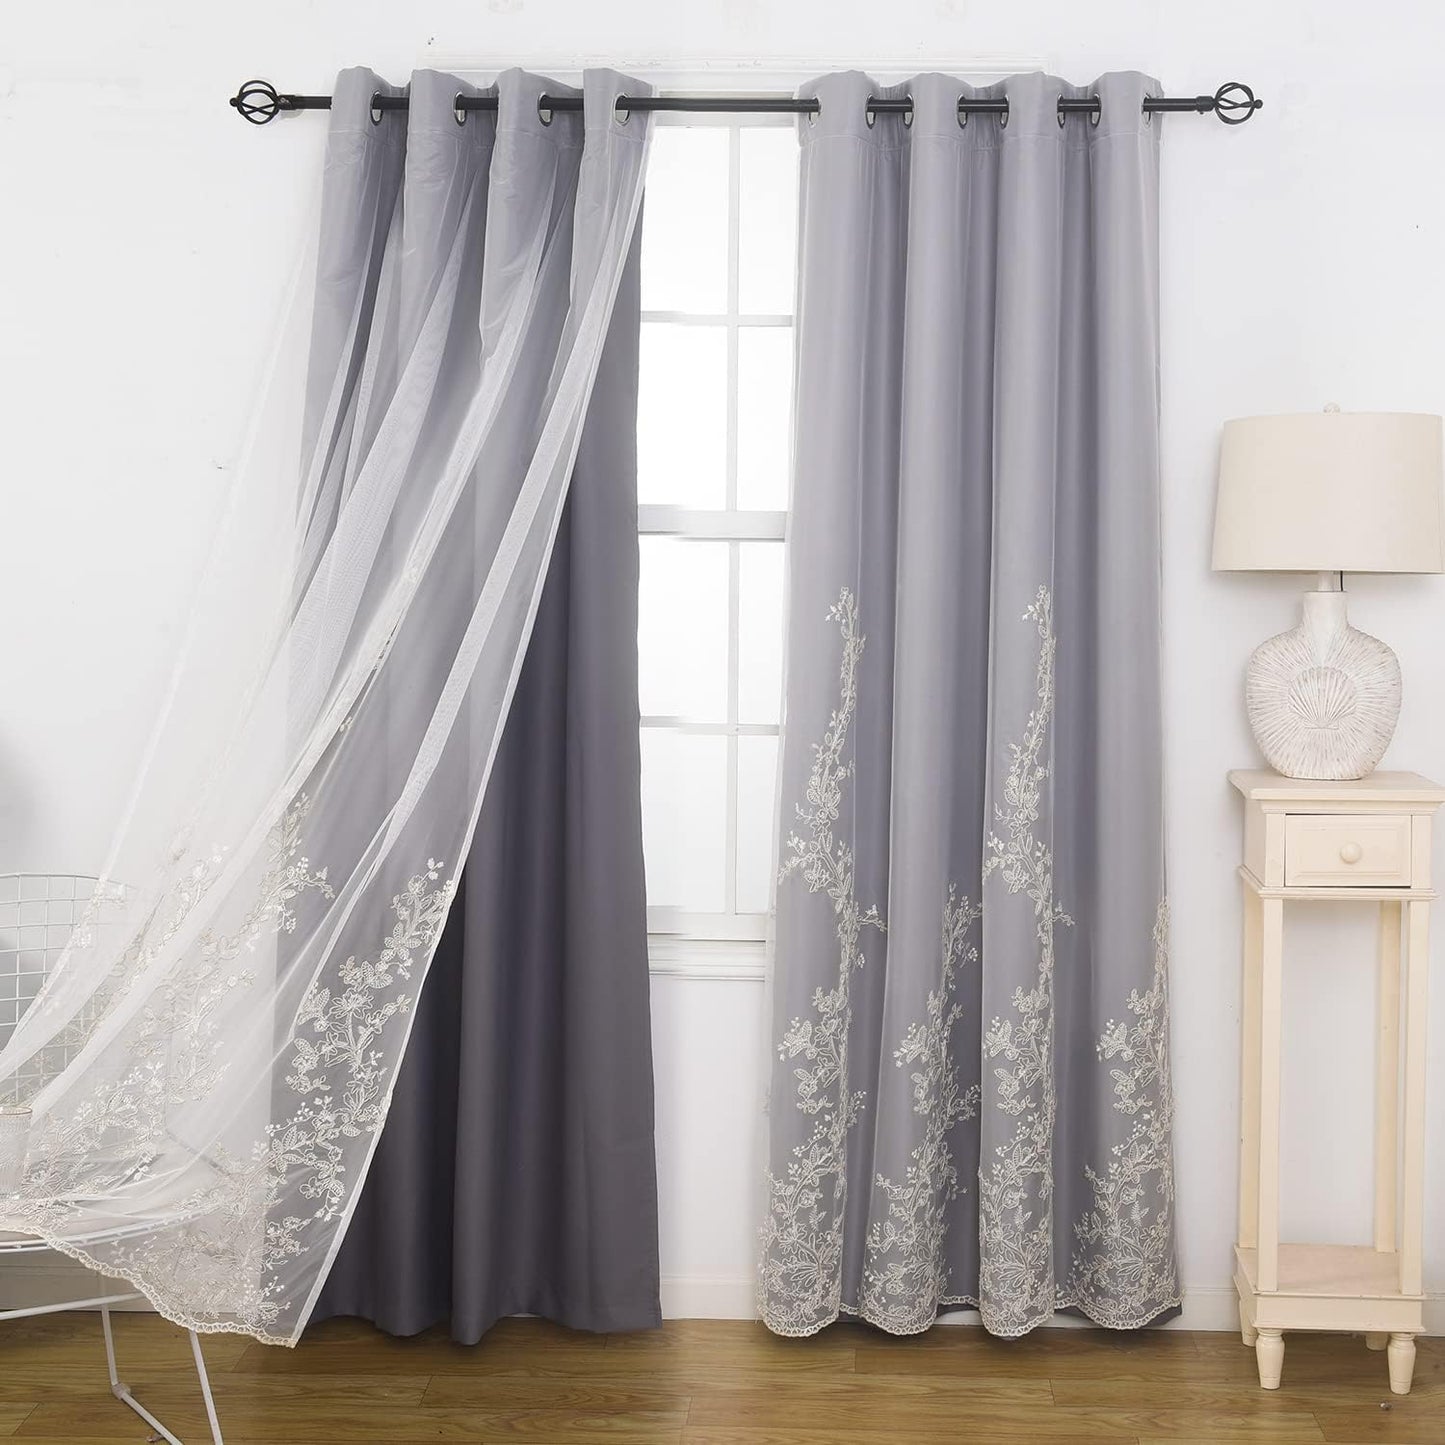 GYROHOME Double Layered Curtains with Embroidered White Sheer Tulle, Mix and Match Curtains Room Darkening Grommet Top Thermal Insulated Drapes,2Panels,52X84Inch,Beige  GYROHOME Dark Grey 52Wx63Lx2 